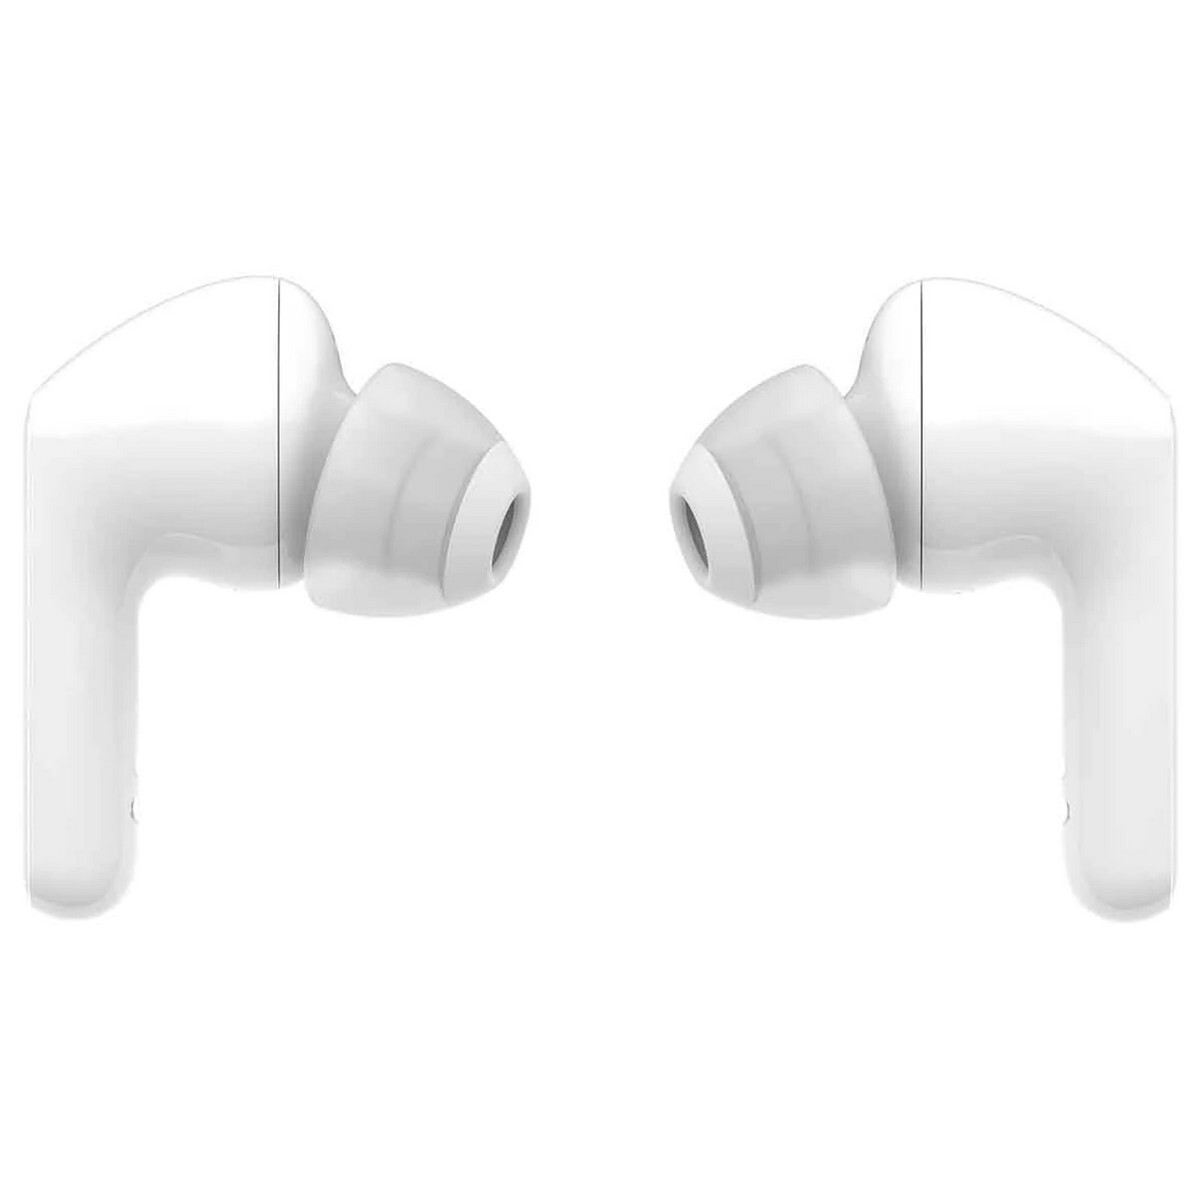 LG FN5U Tone Free Wireless Earbuds with Noise Isolation White